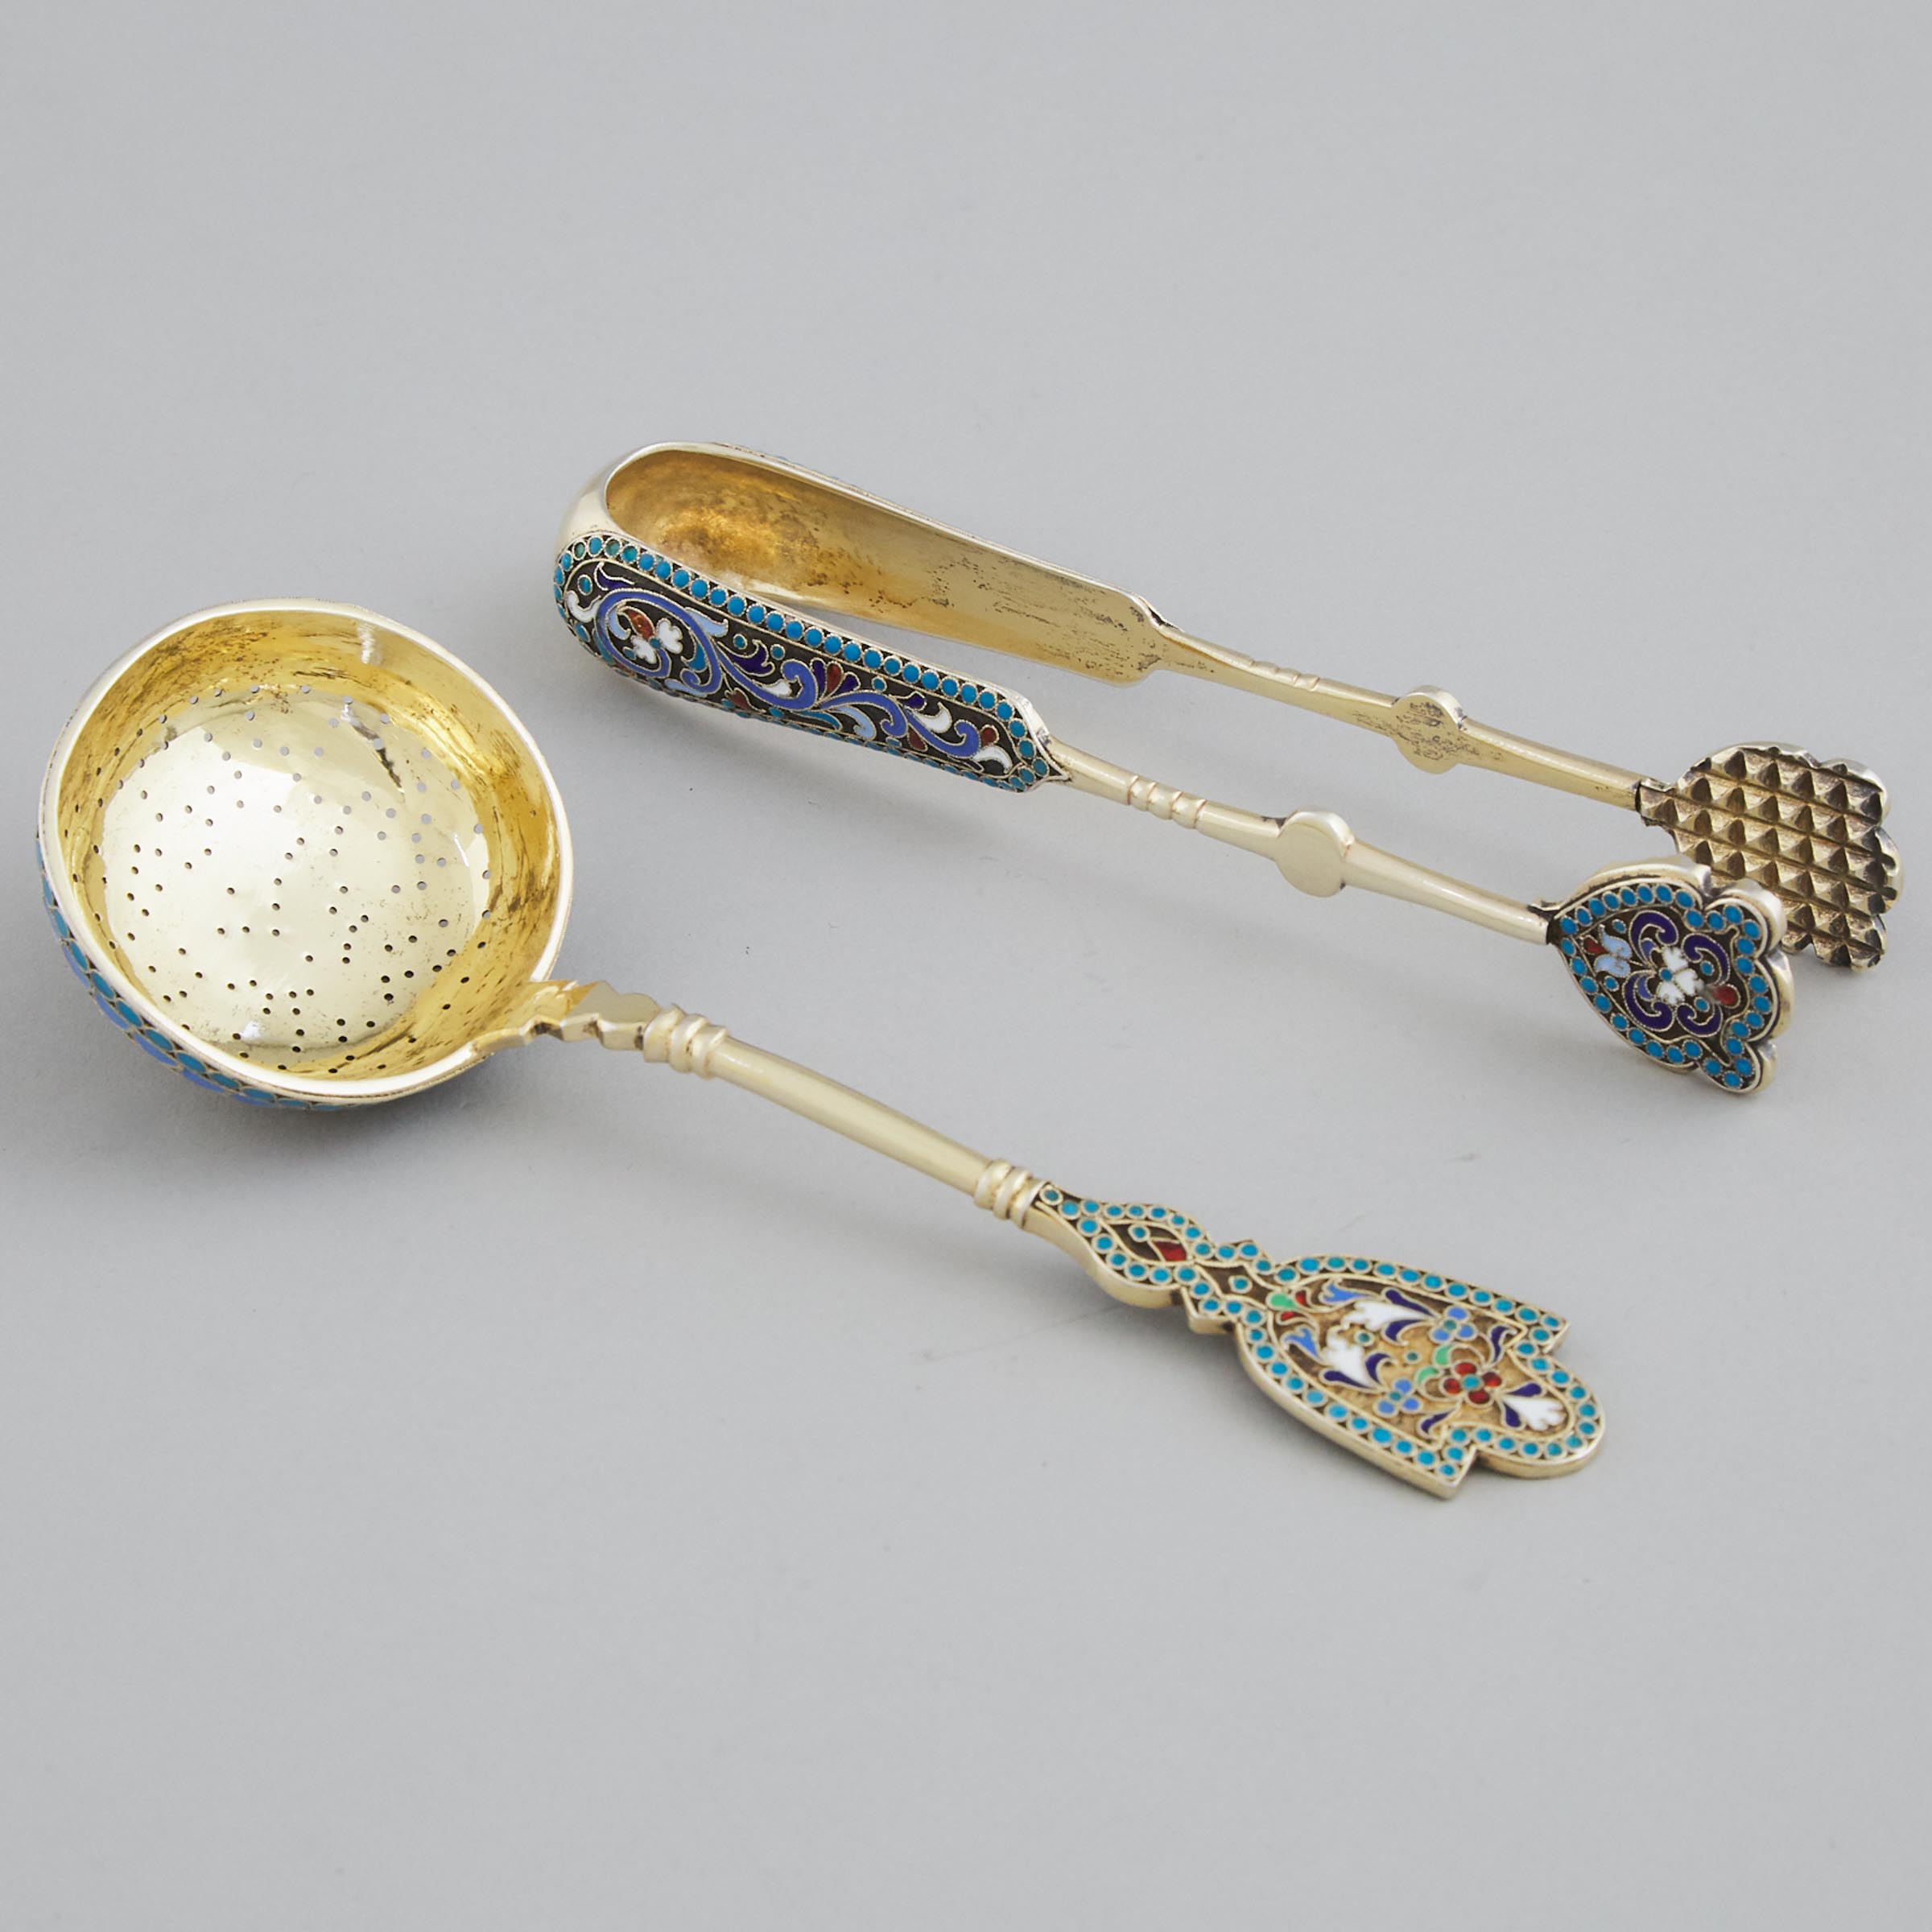 Russian Silver-Gilt and Cloisonné Enamel Sugar Tongs and a Sifting Ladle, Gustav Klingert and probably Ivan Saltikov, Moscow, late 19th century